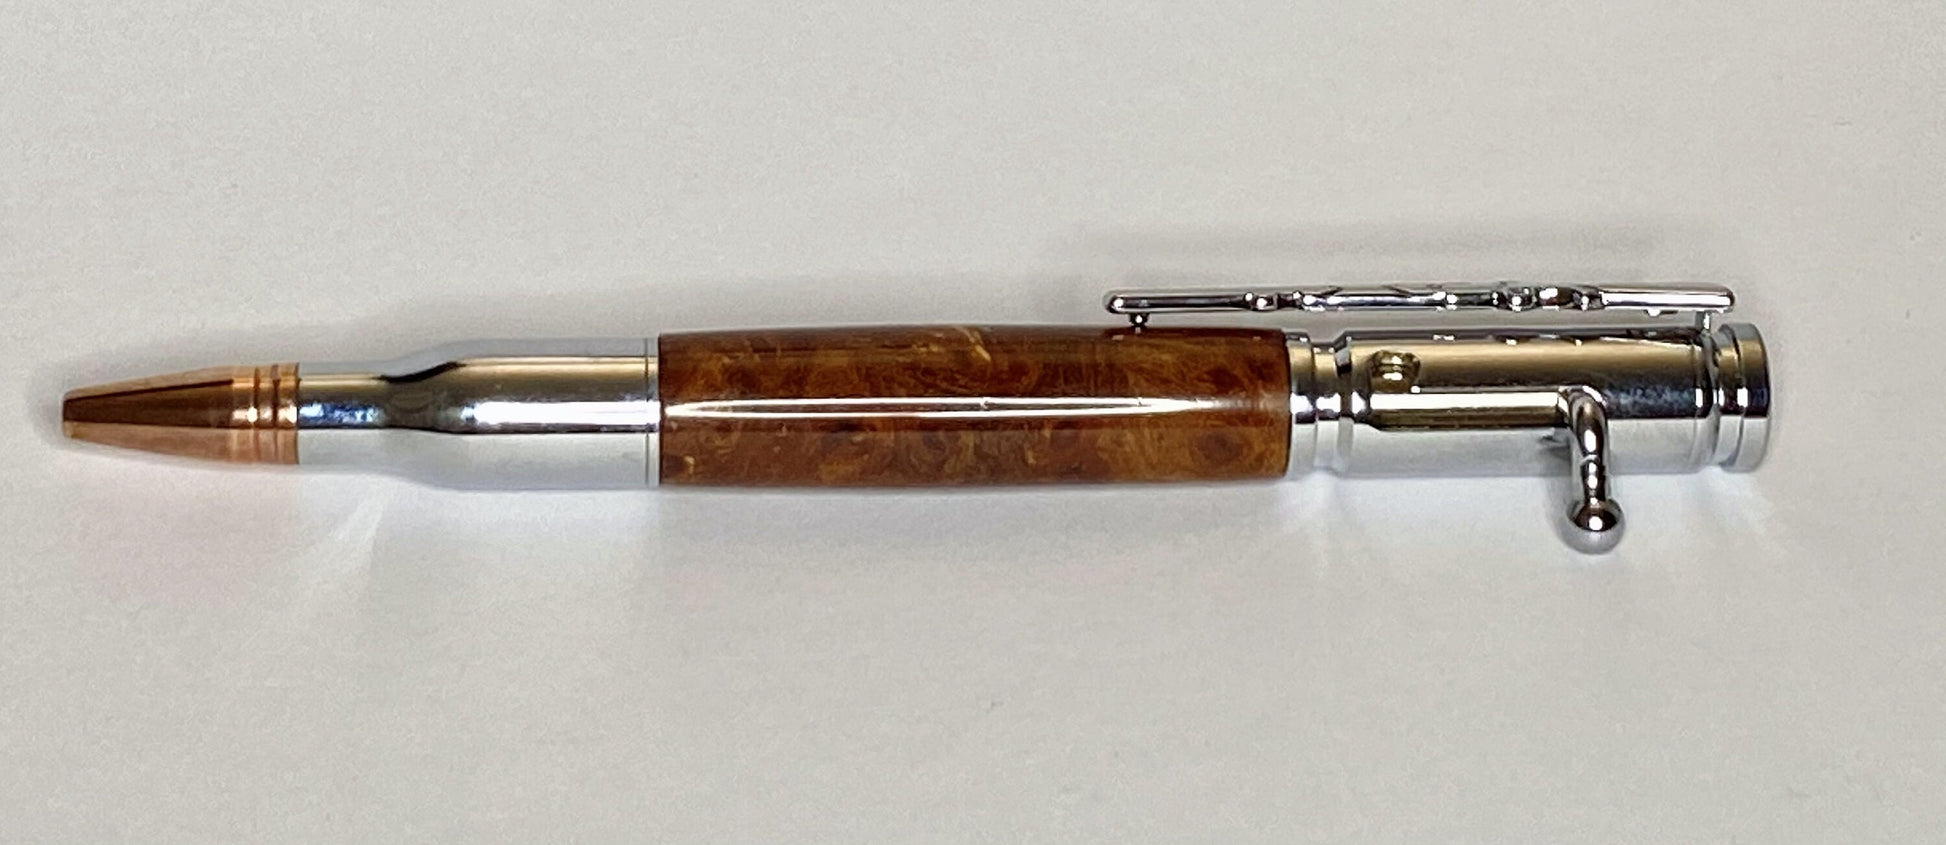 A handturned Popular Burr wood Bolt action pen with Chrome plated fittings and copper coloured tip to give the "bullet" effect